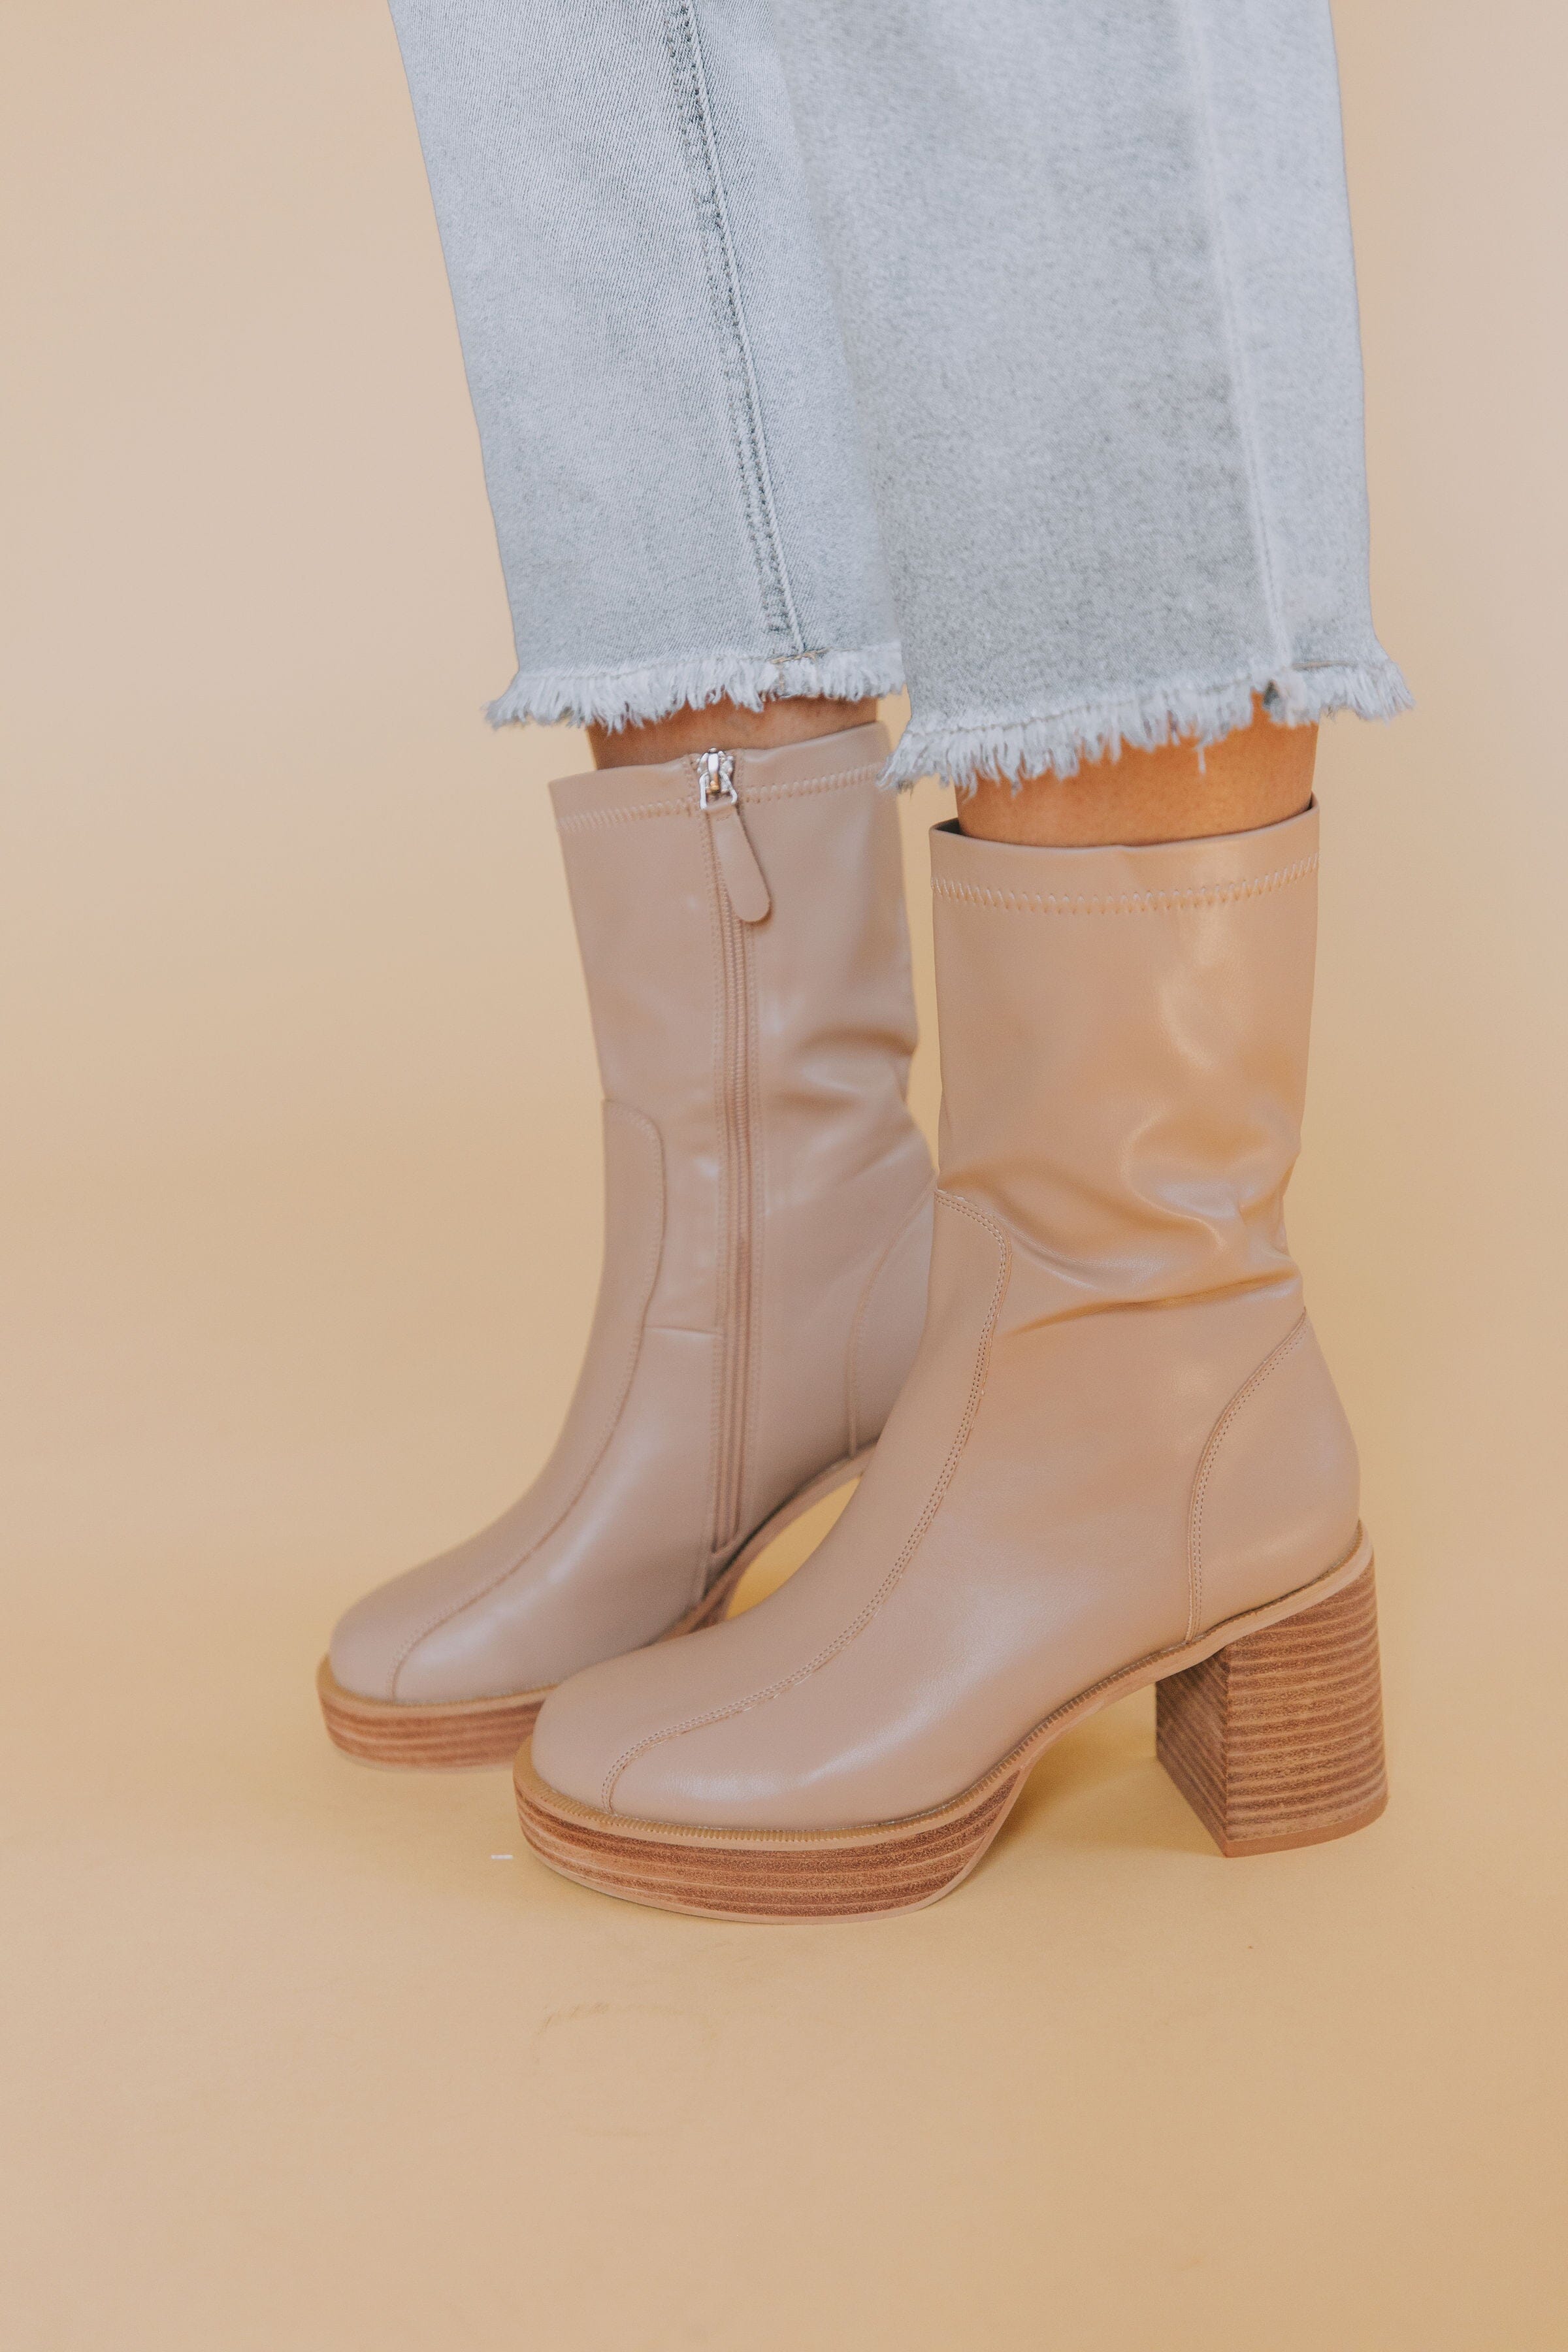 Rushing In Boots - 2 Colors! 6